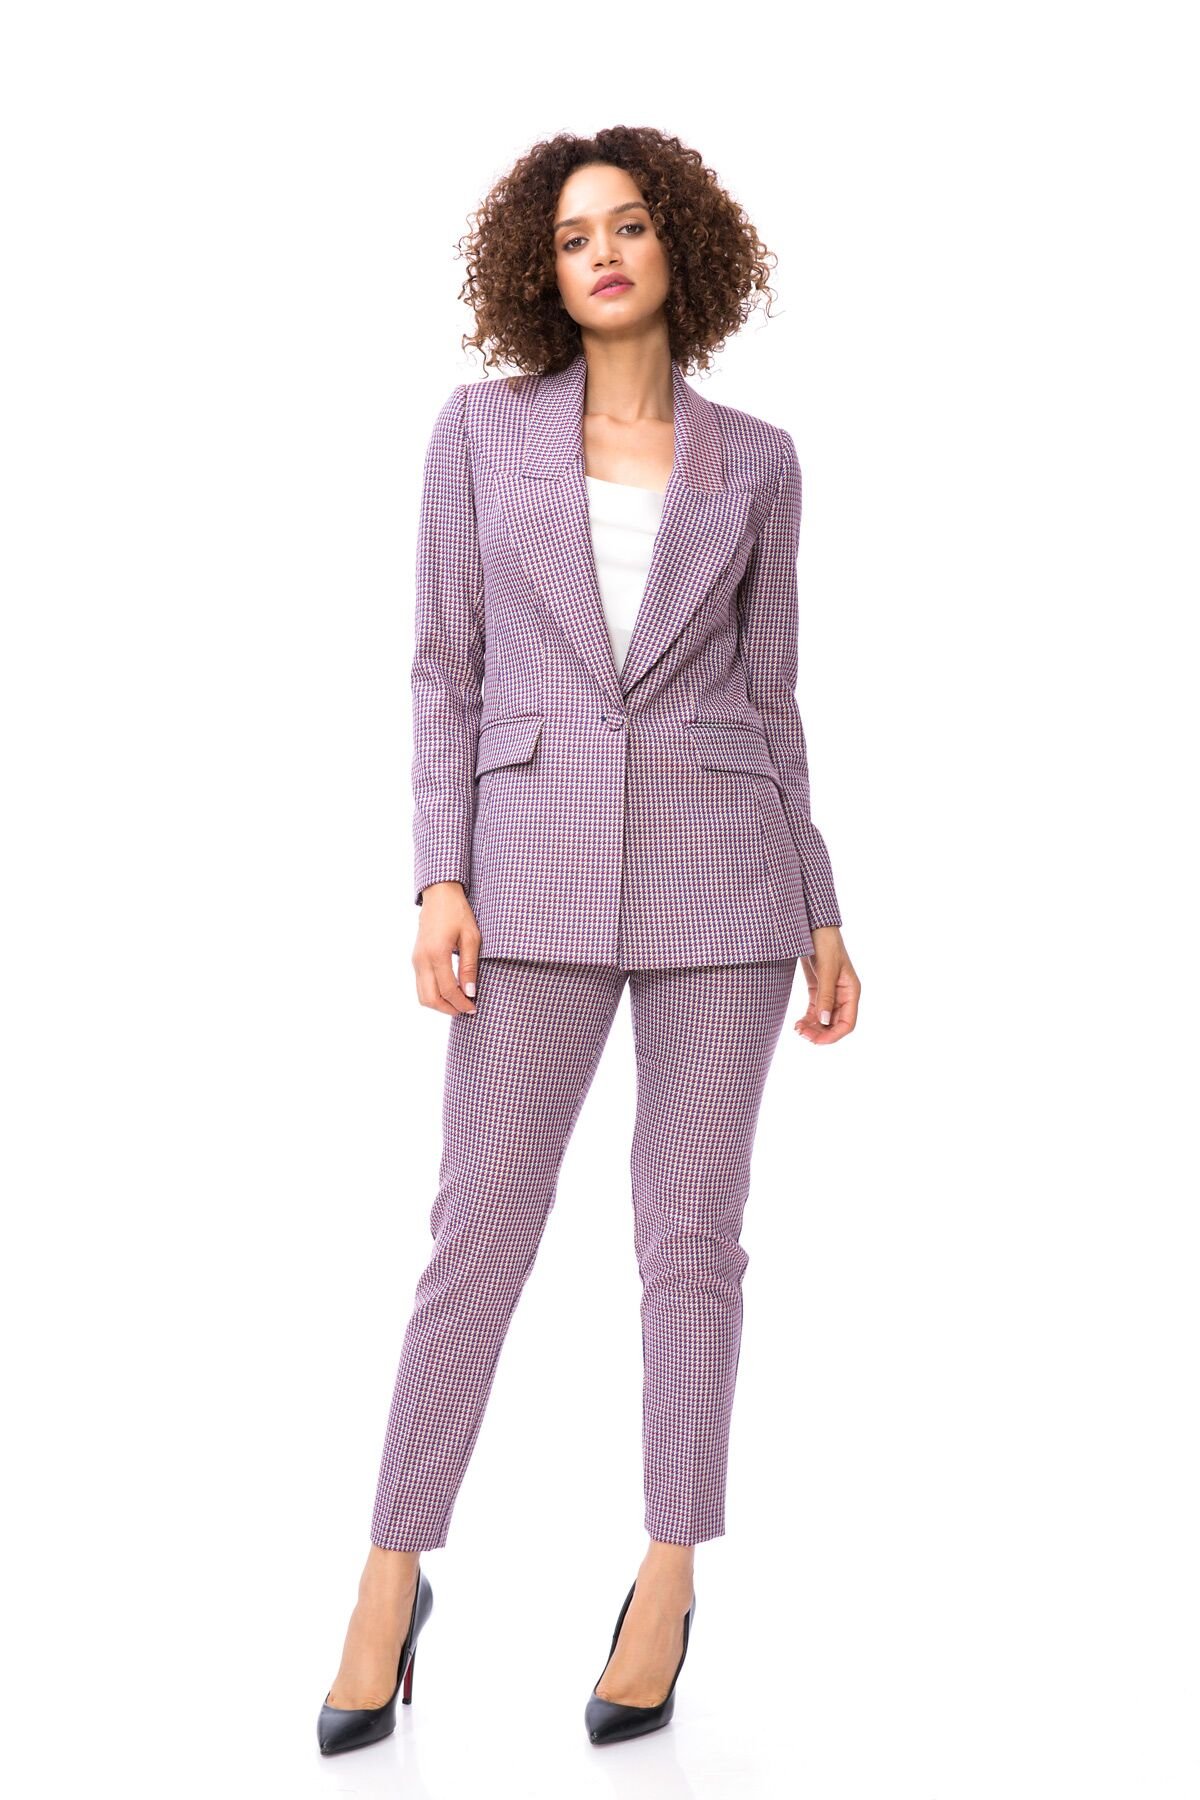 Blue Women's Suit With Crow's Feet Pattern With Mono Closure